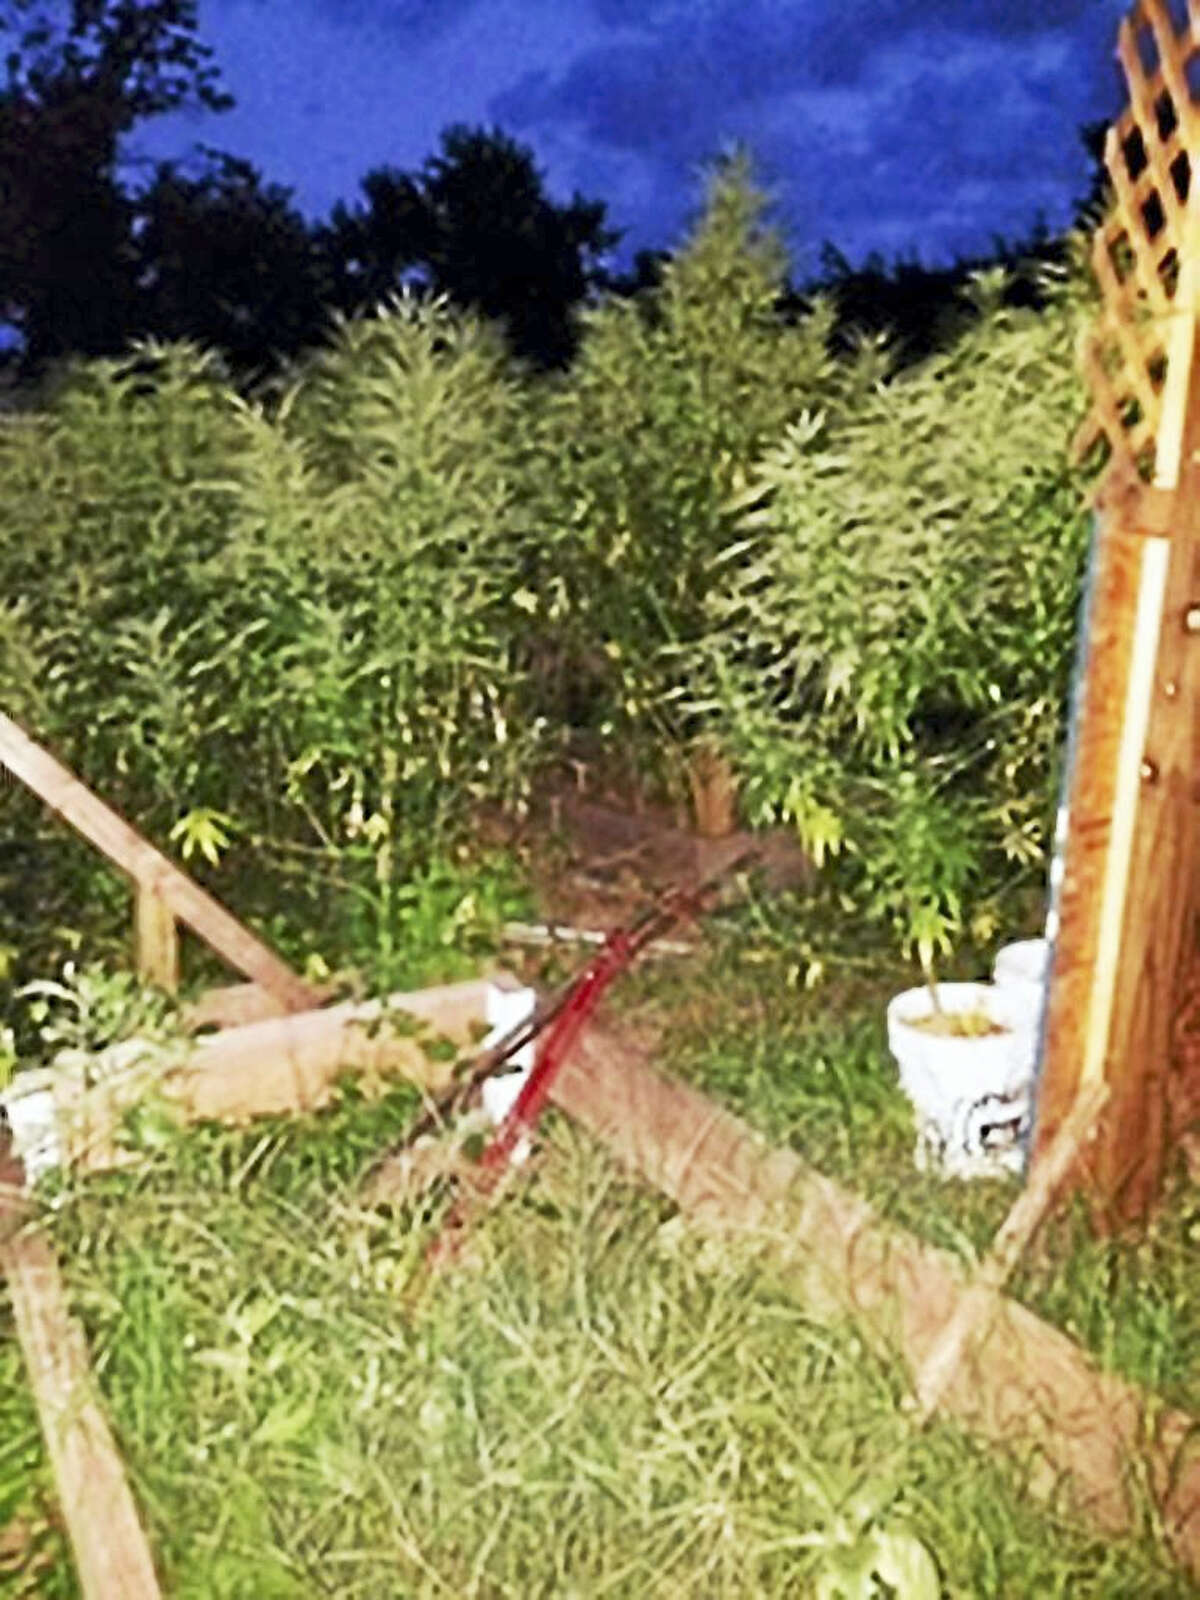 Authorities allegedly discovered an estimate 600 marijuana plants in the backyard of a daycare center.